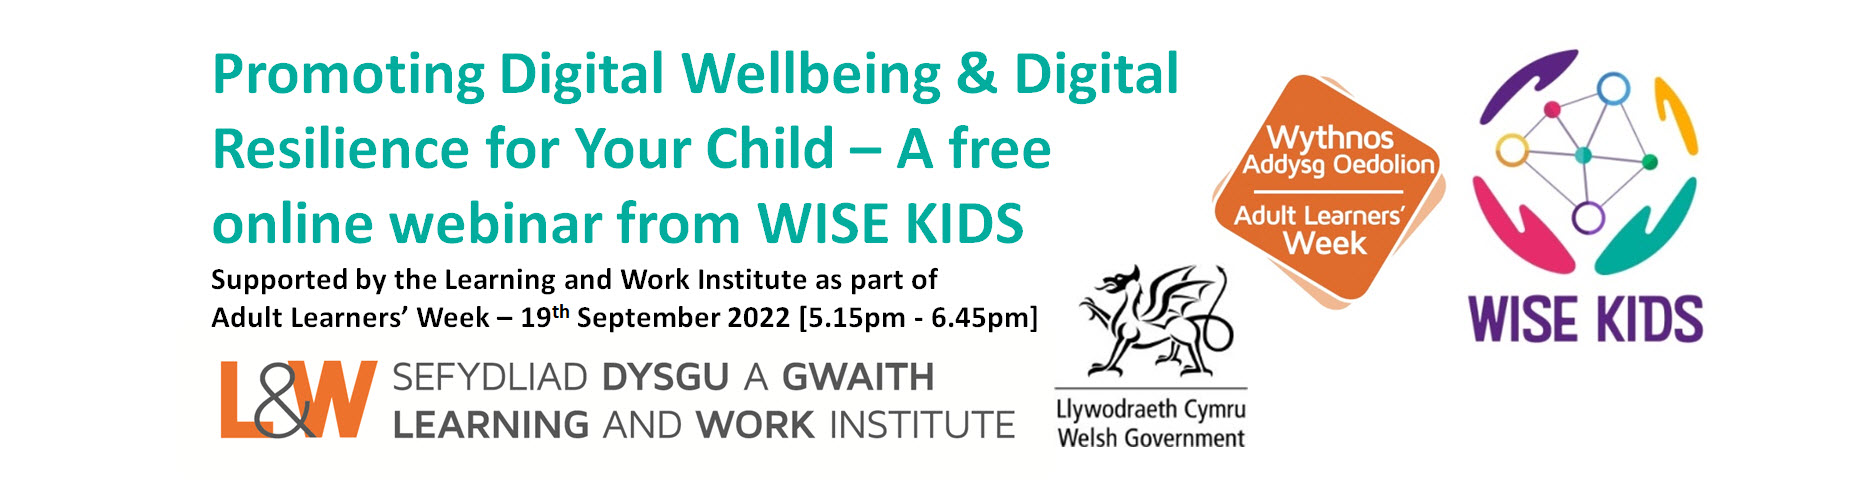 promoting-digital-wellbeing-and-digital-resilience-for-your-child-a-free-online-webinar